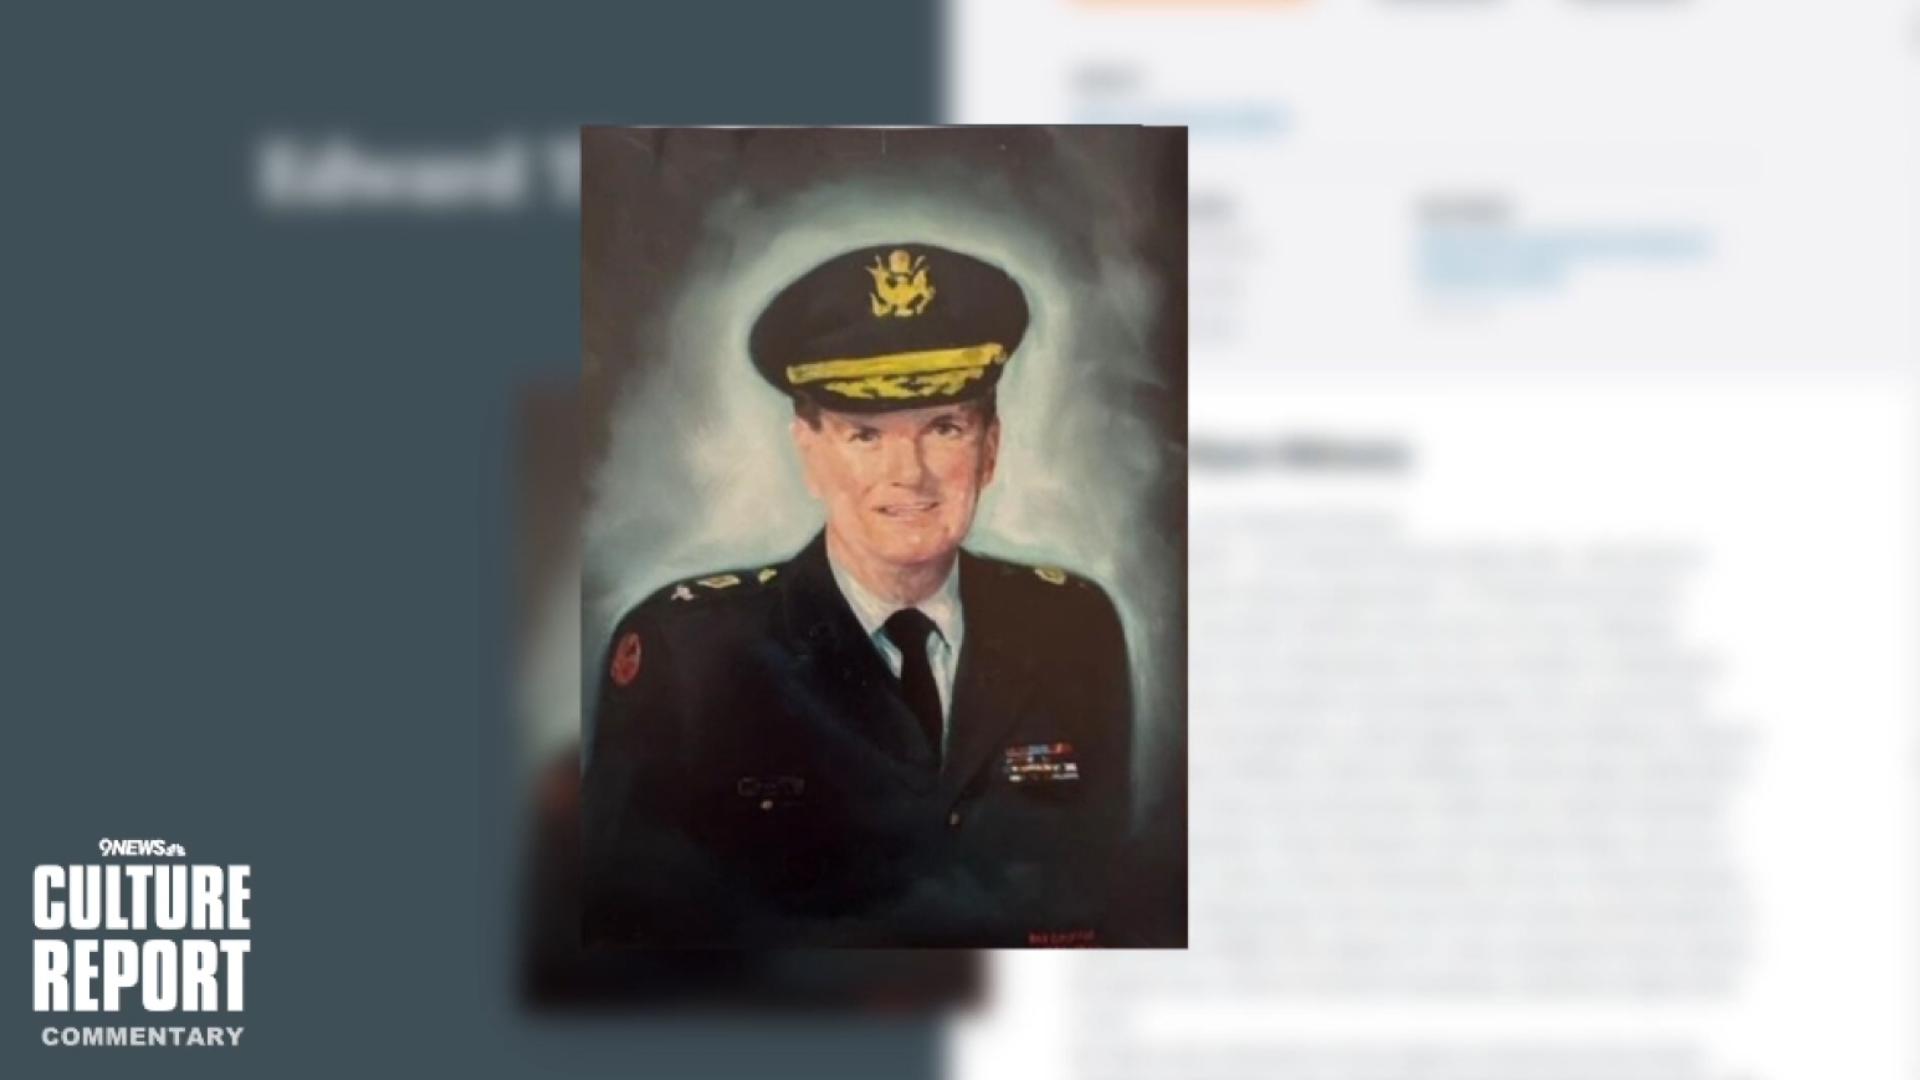 "Now that my secret is known, I'll forever Rest in Peace." That's how a veteran ended a message he wrote in his own obituary, where he finally shared that he was gay